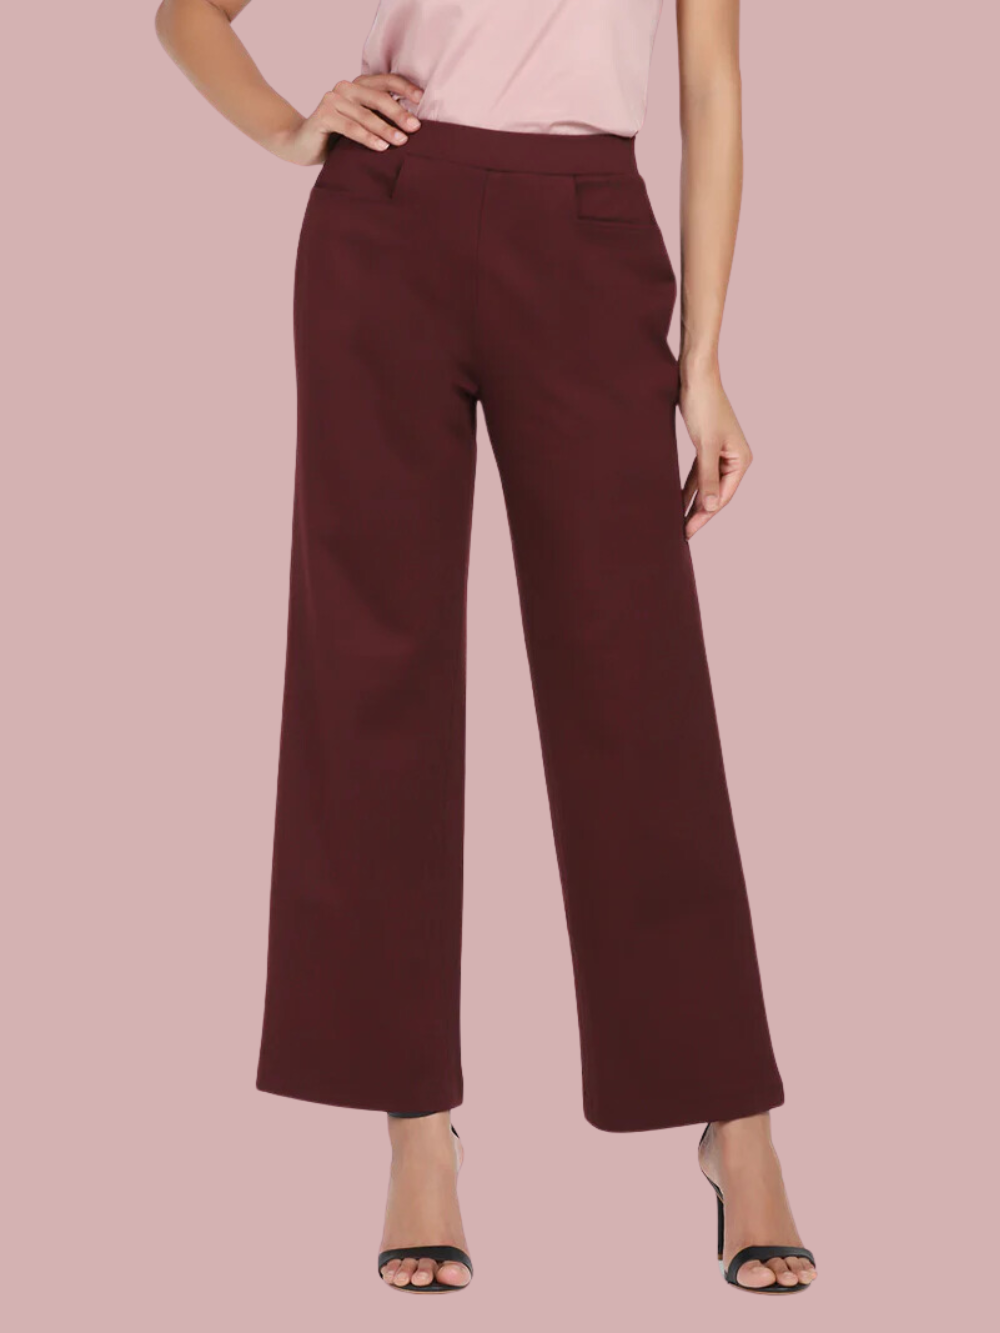 Women's Cool Stretch Lounge Pant made with Organic Cotton | Pact